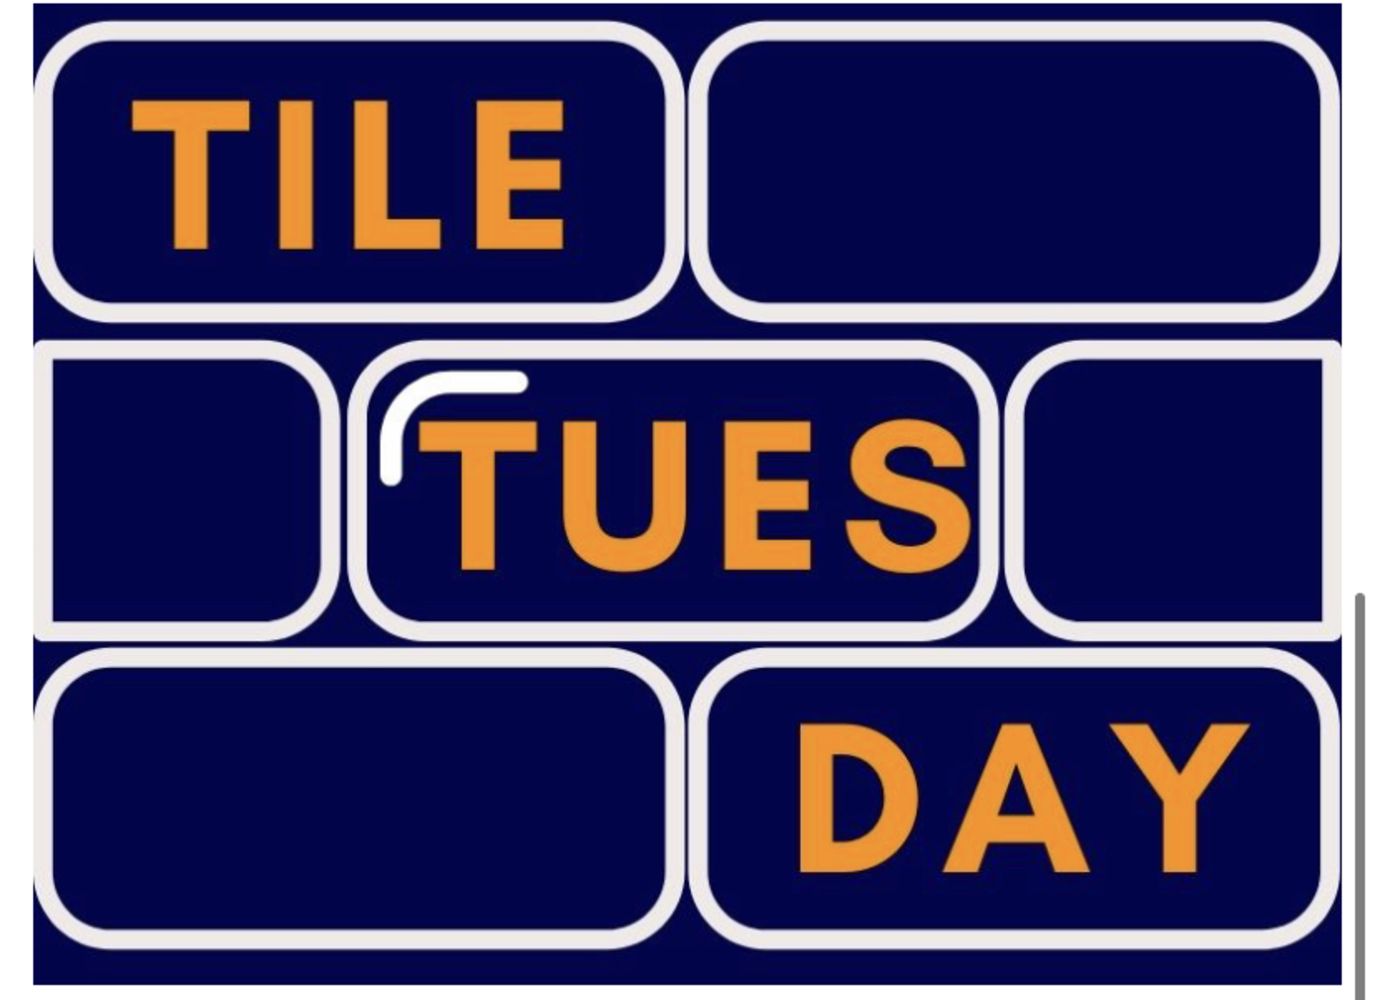 No Reserve - Tile Tuesday - “over £80k worth of tiles – Sourced from Johnsons Tiles” - 12th October 2021